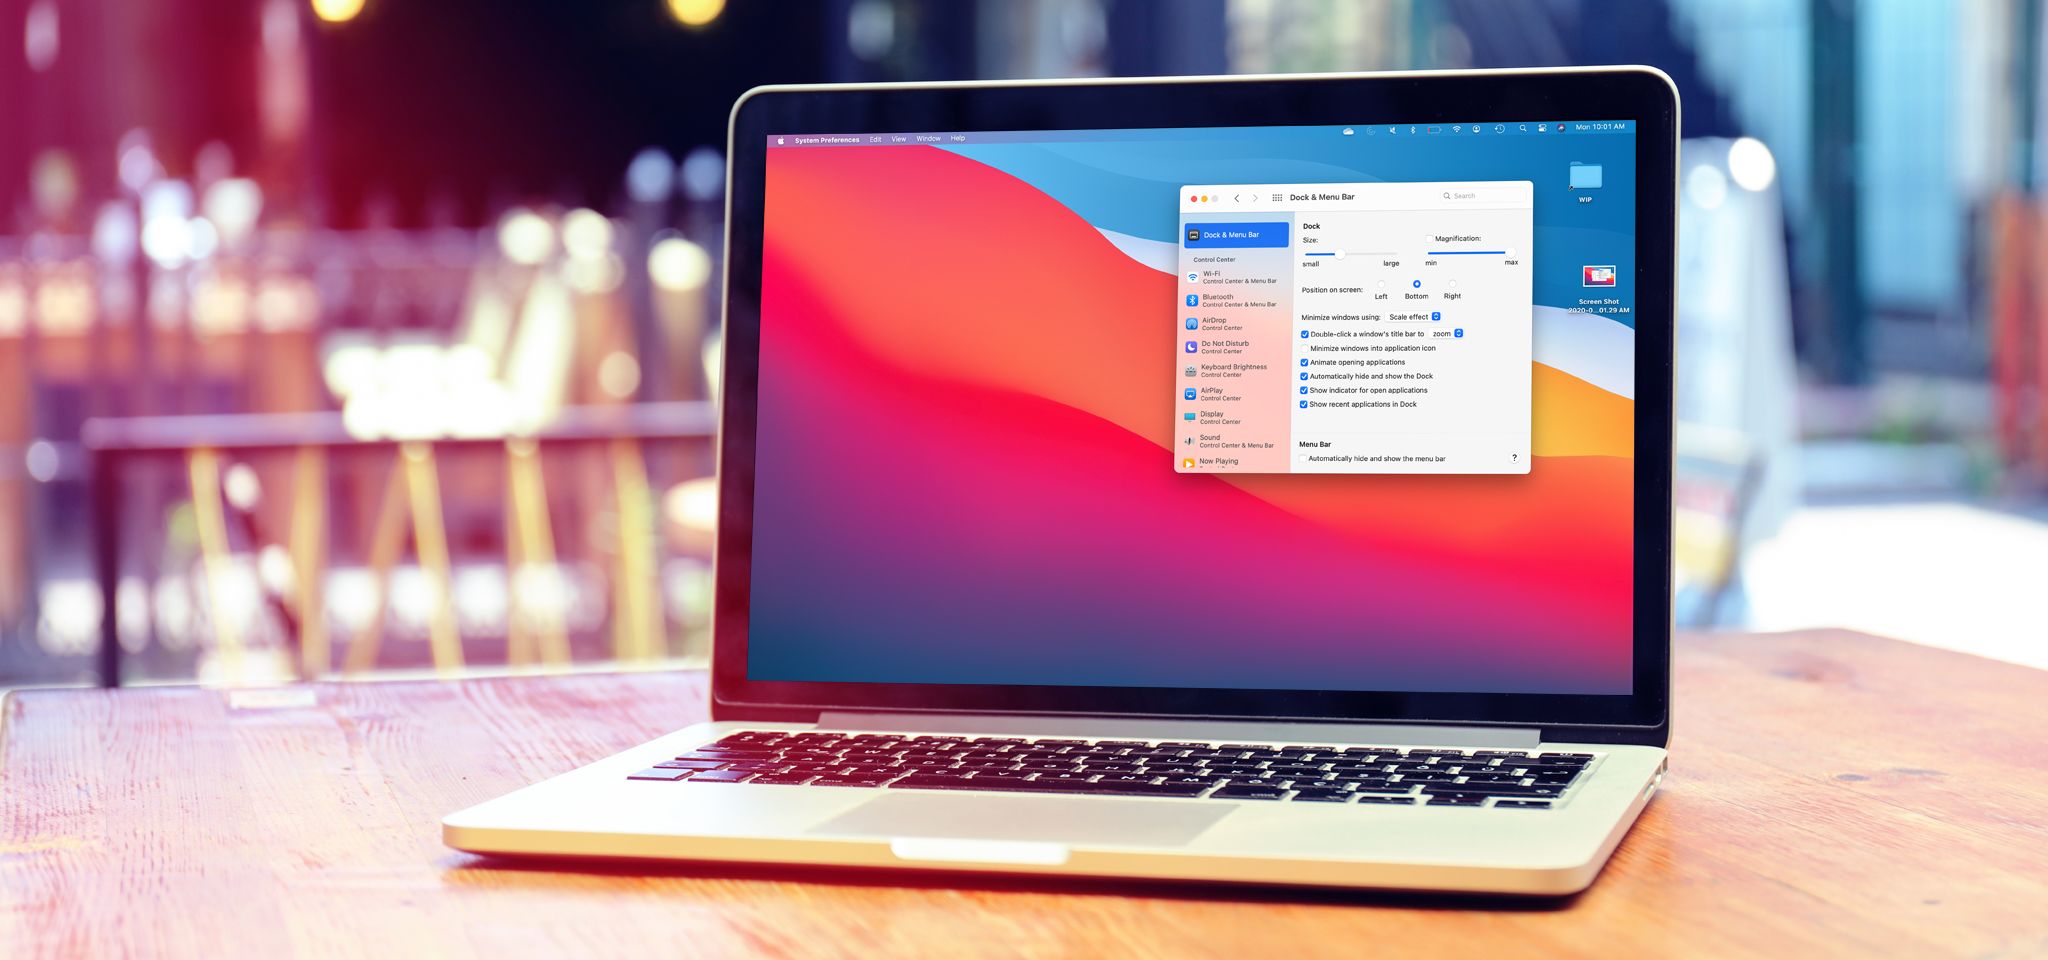 American student hacked Mac, and Apple paid him a record $100.5 thousand for it